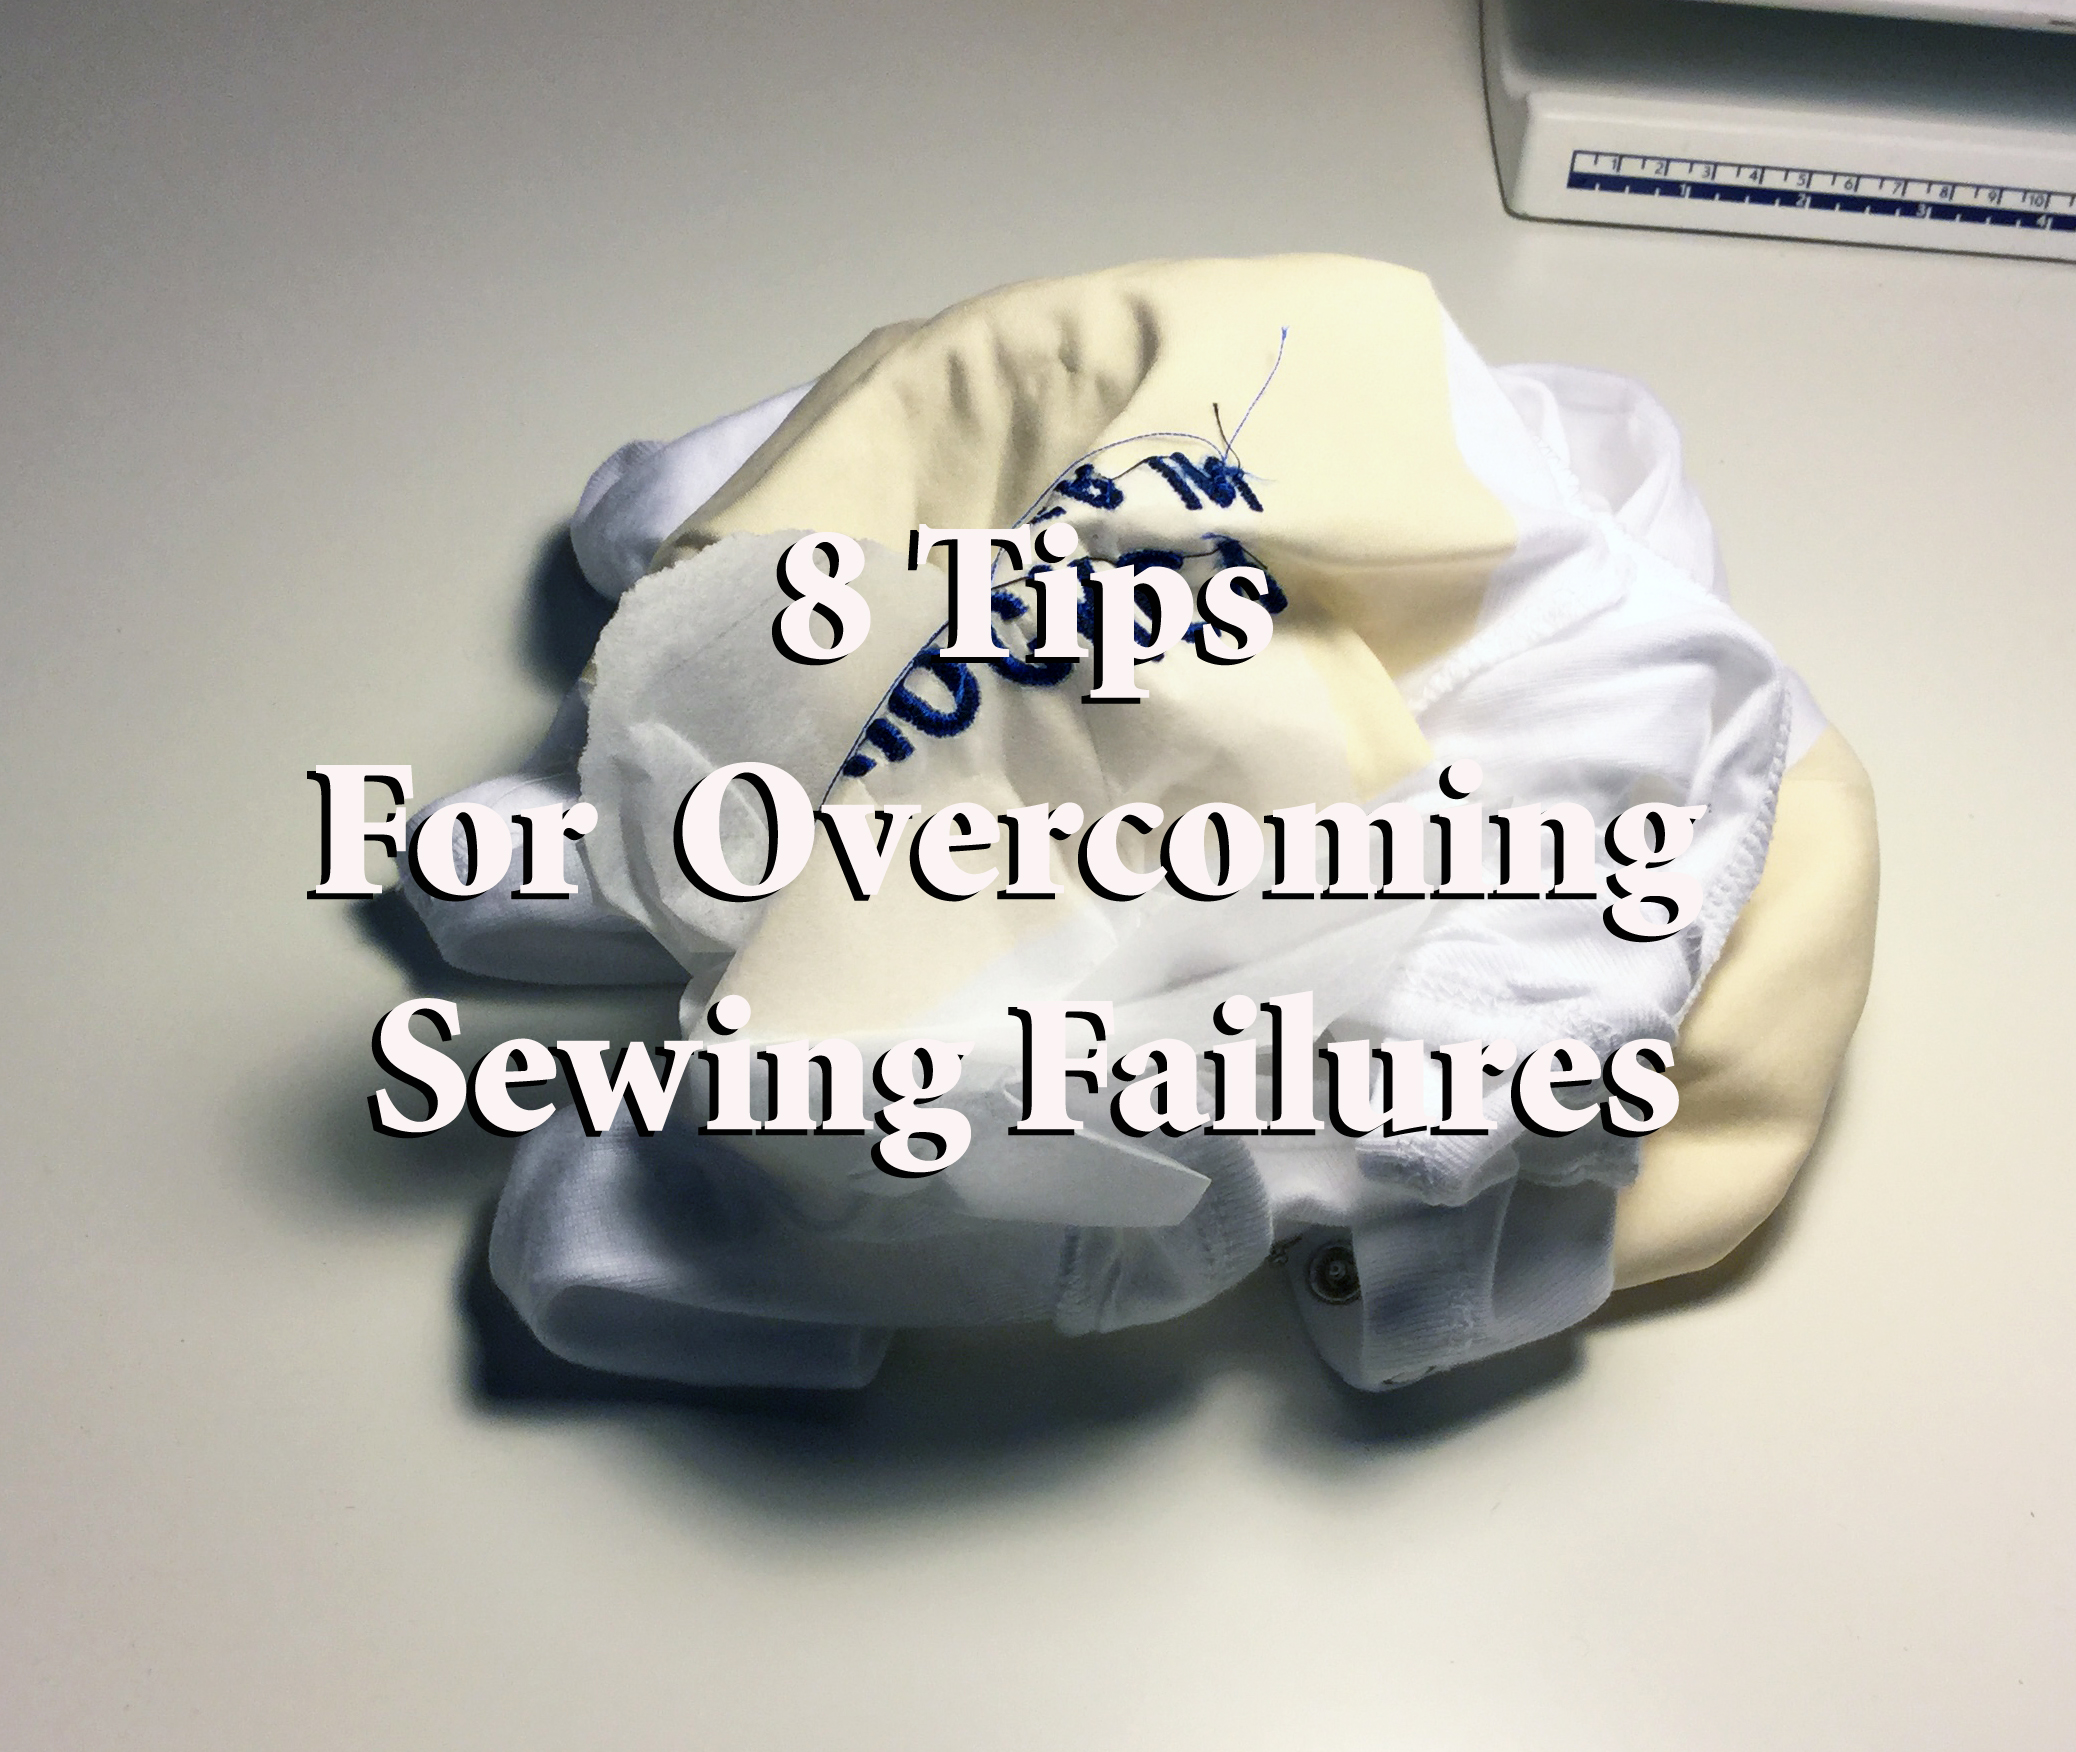 8 tips for overcoming sewing failures. Ways to improve your sewing.